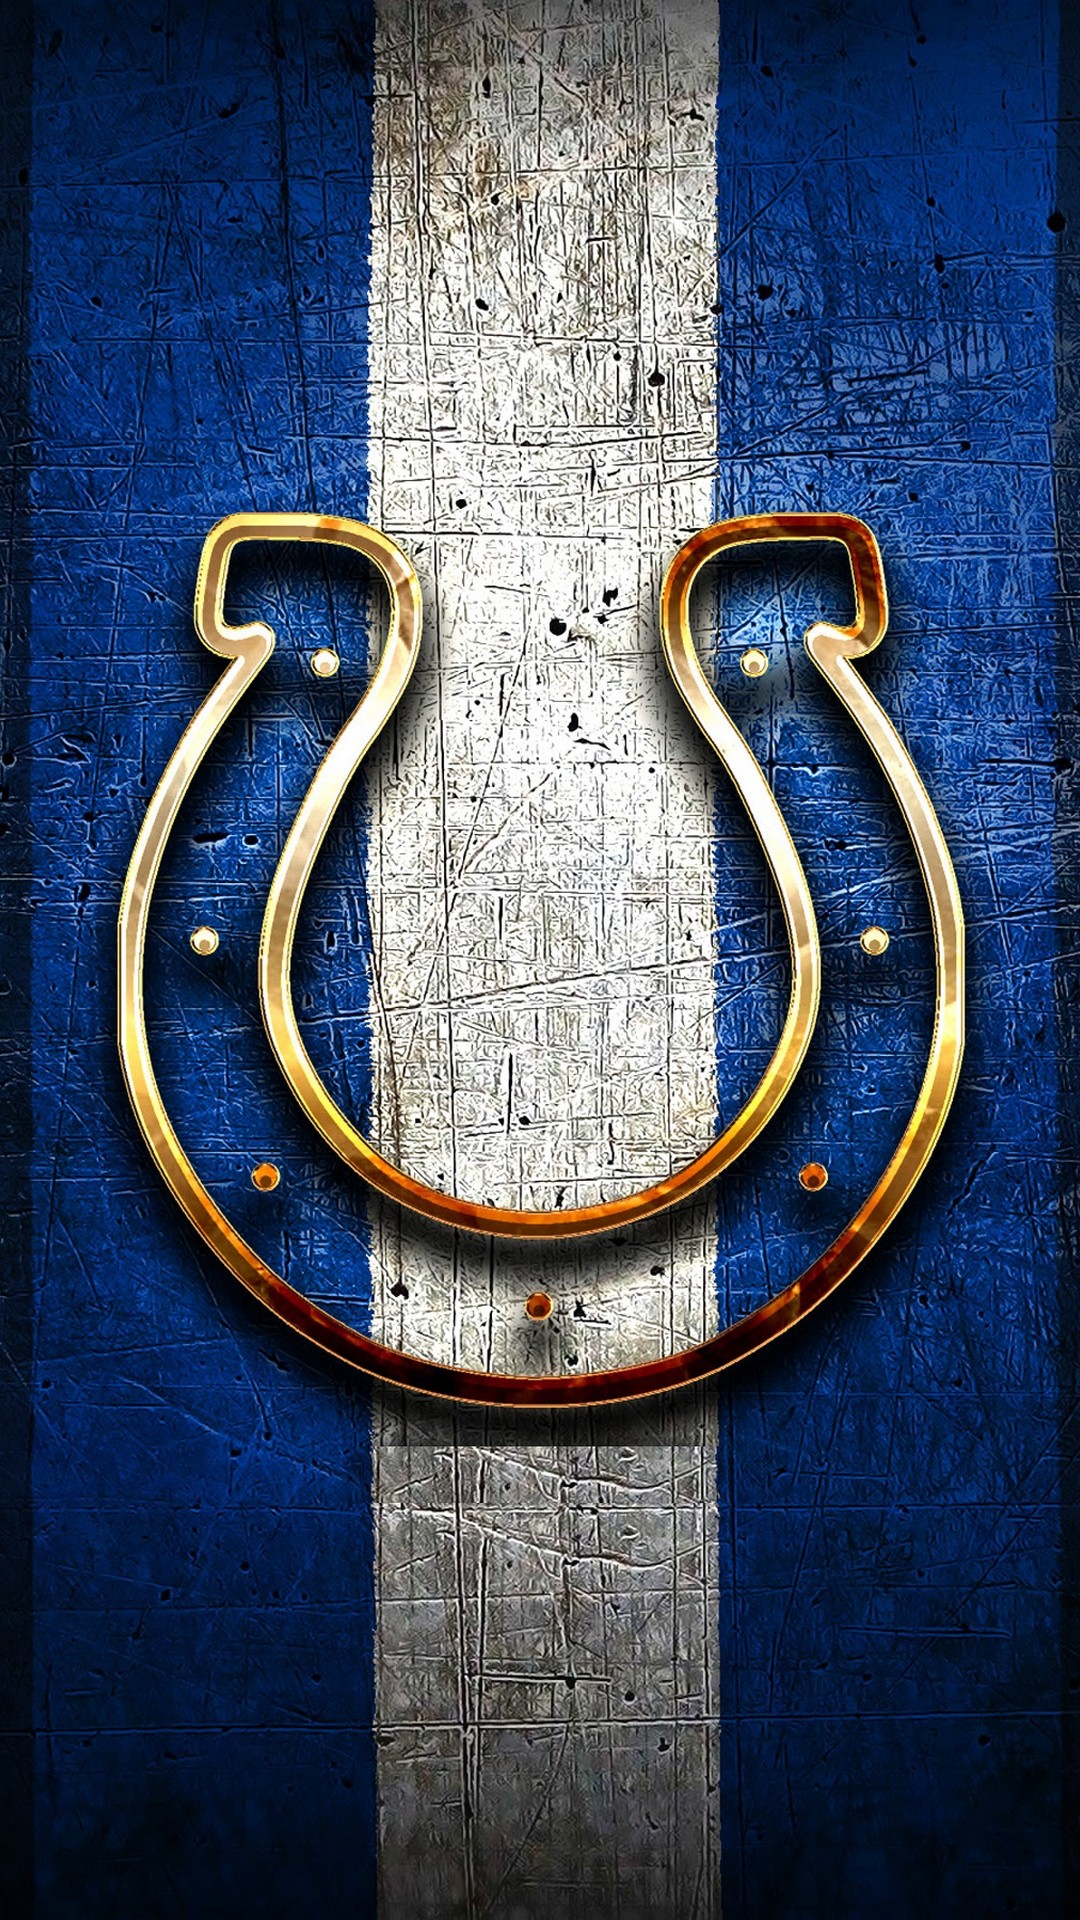 Free Download Wallpaper Indianapolis Colts Iphone Nfl Football Wallpapers 1080x19 For Your Desktop Mobile Tablet Explore 37 Indianapolis Colts Wallpapers Indianapolis Colts Wallpapers Indianapolis Colts Wallpaper Indianapolis